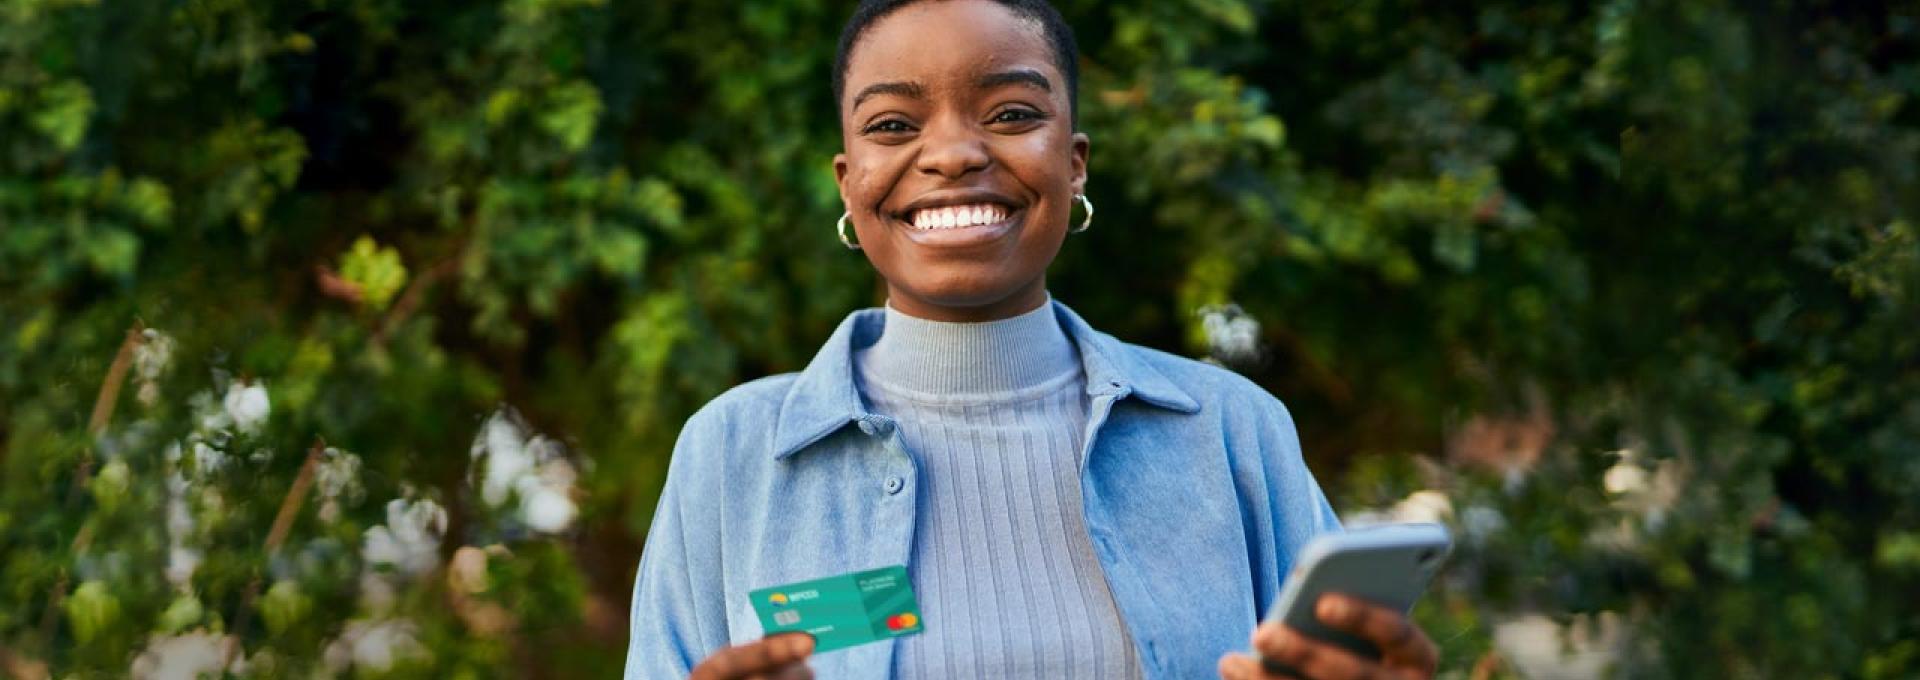 A photo of a woman. She is holding a credit card in her left hand and a smartphone in her right. 